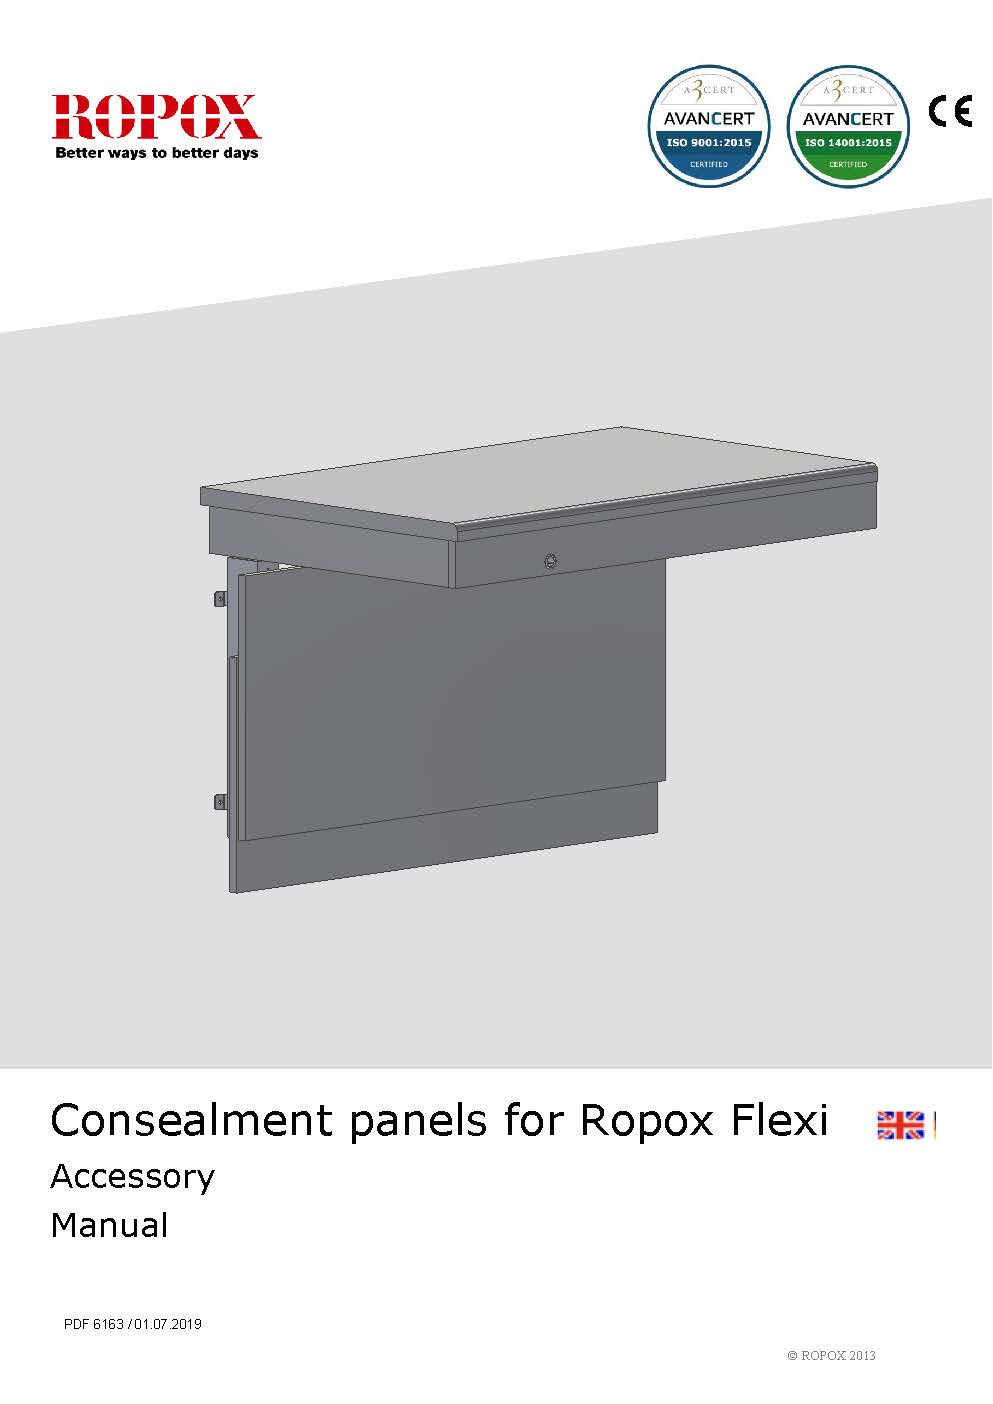 Ropox user & mounting manual - Accesory Consealment panels Flexi worktops